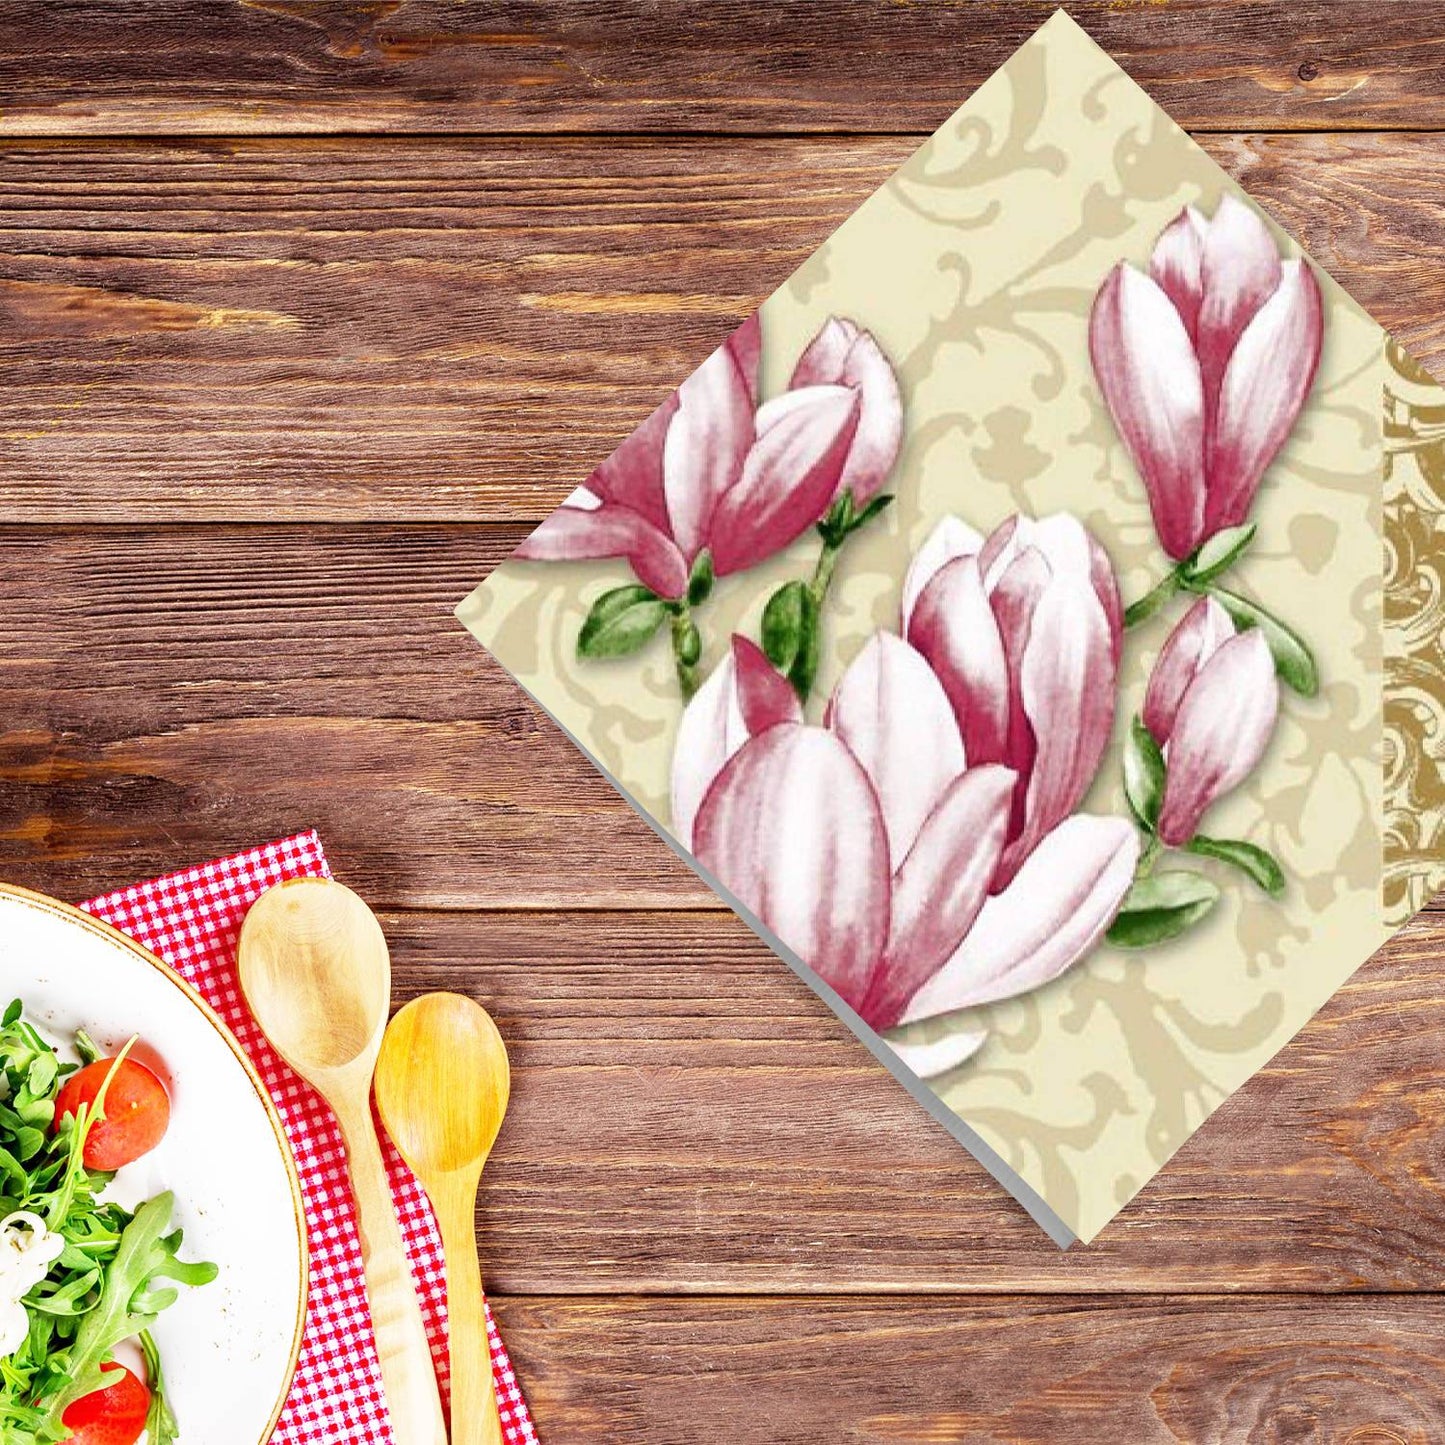 Timeless Tulip 2 Disposable Lunch Paper Napkins 20 Ct Tablesettings Nicole Fantini Collection   